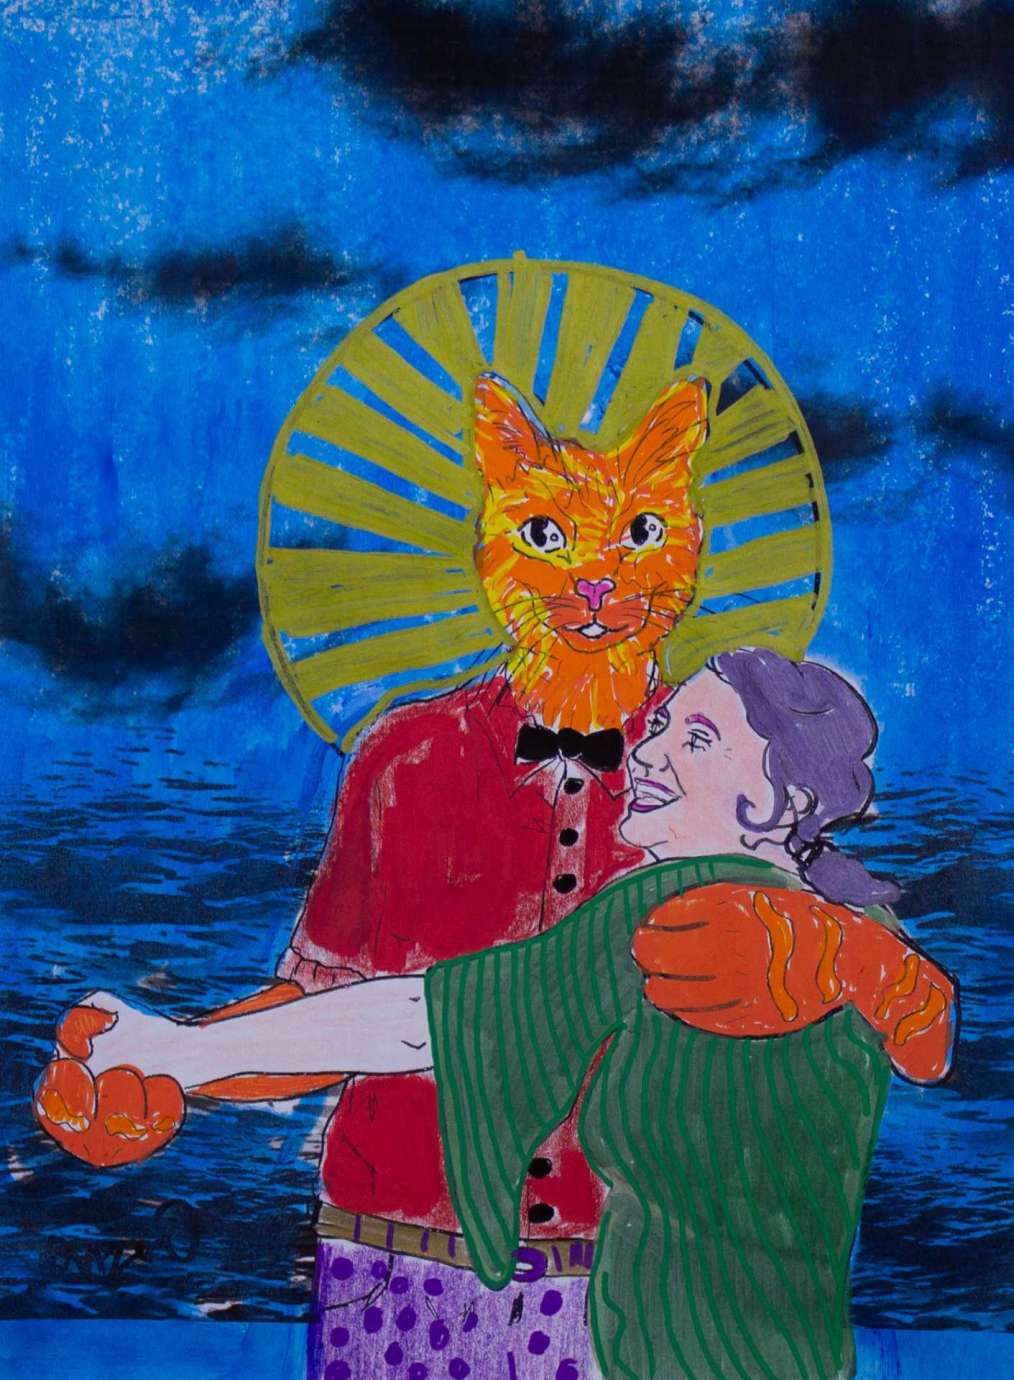 Drawing of an orange cat dressed in a red suit dancing with a woman with brown hair and a green shirt